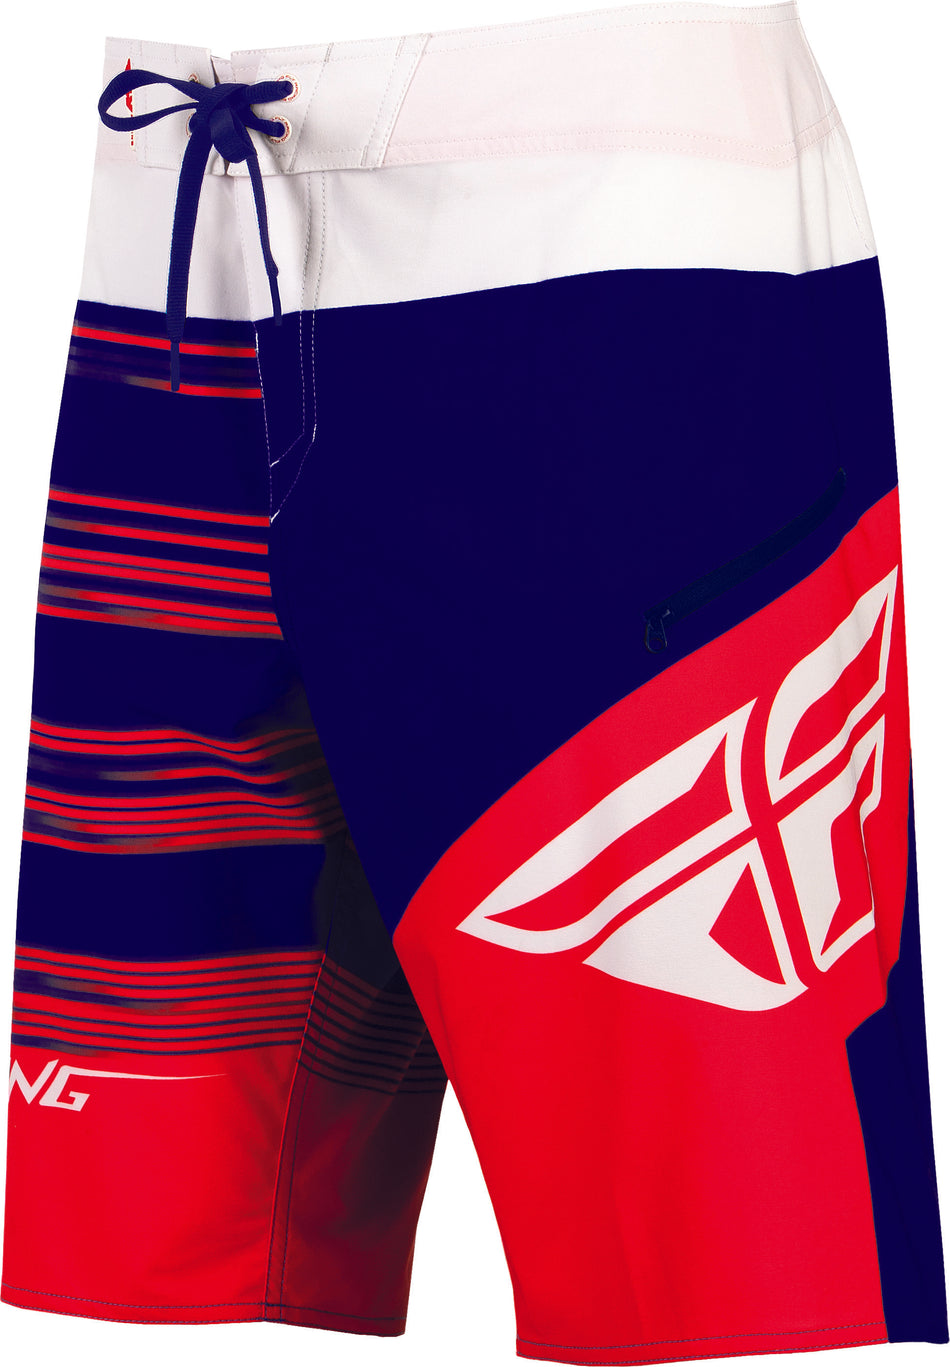 FLY RACING Influx Boardshorts Red/Blue/White Sz 36 353-19236